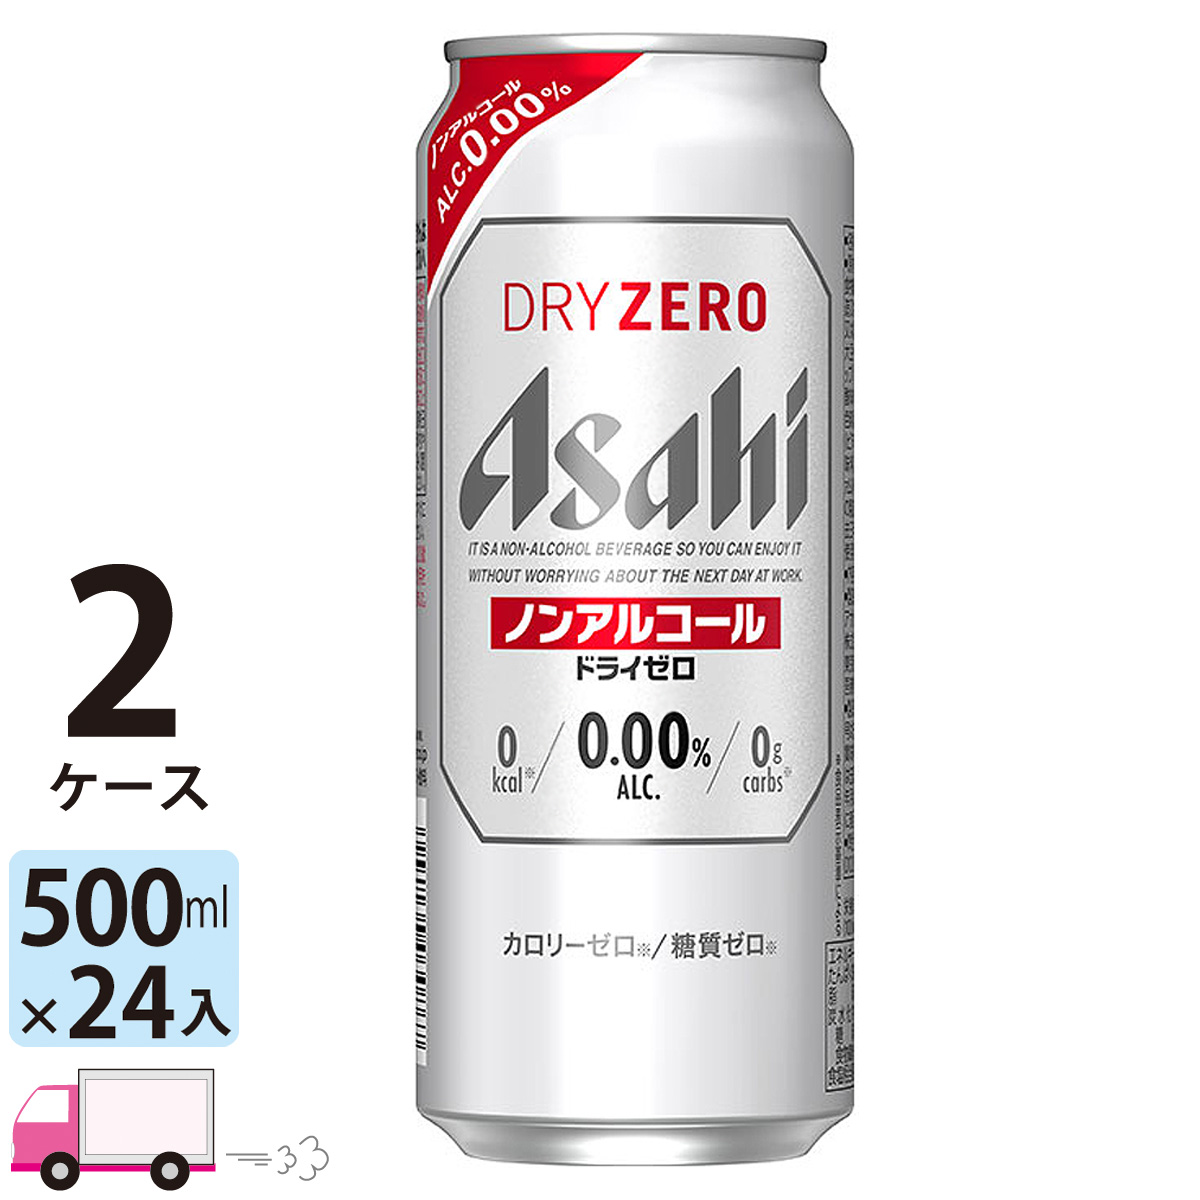  Asahi dry Zero 500ml 24 can go in 2 case (48ps.@) non-alcohol beer free shipping ( one part region excepting )